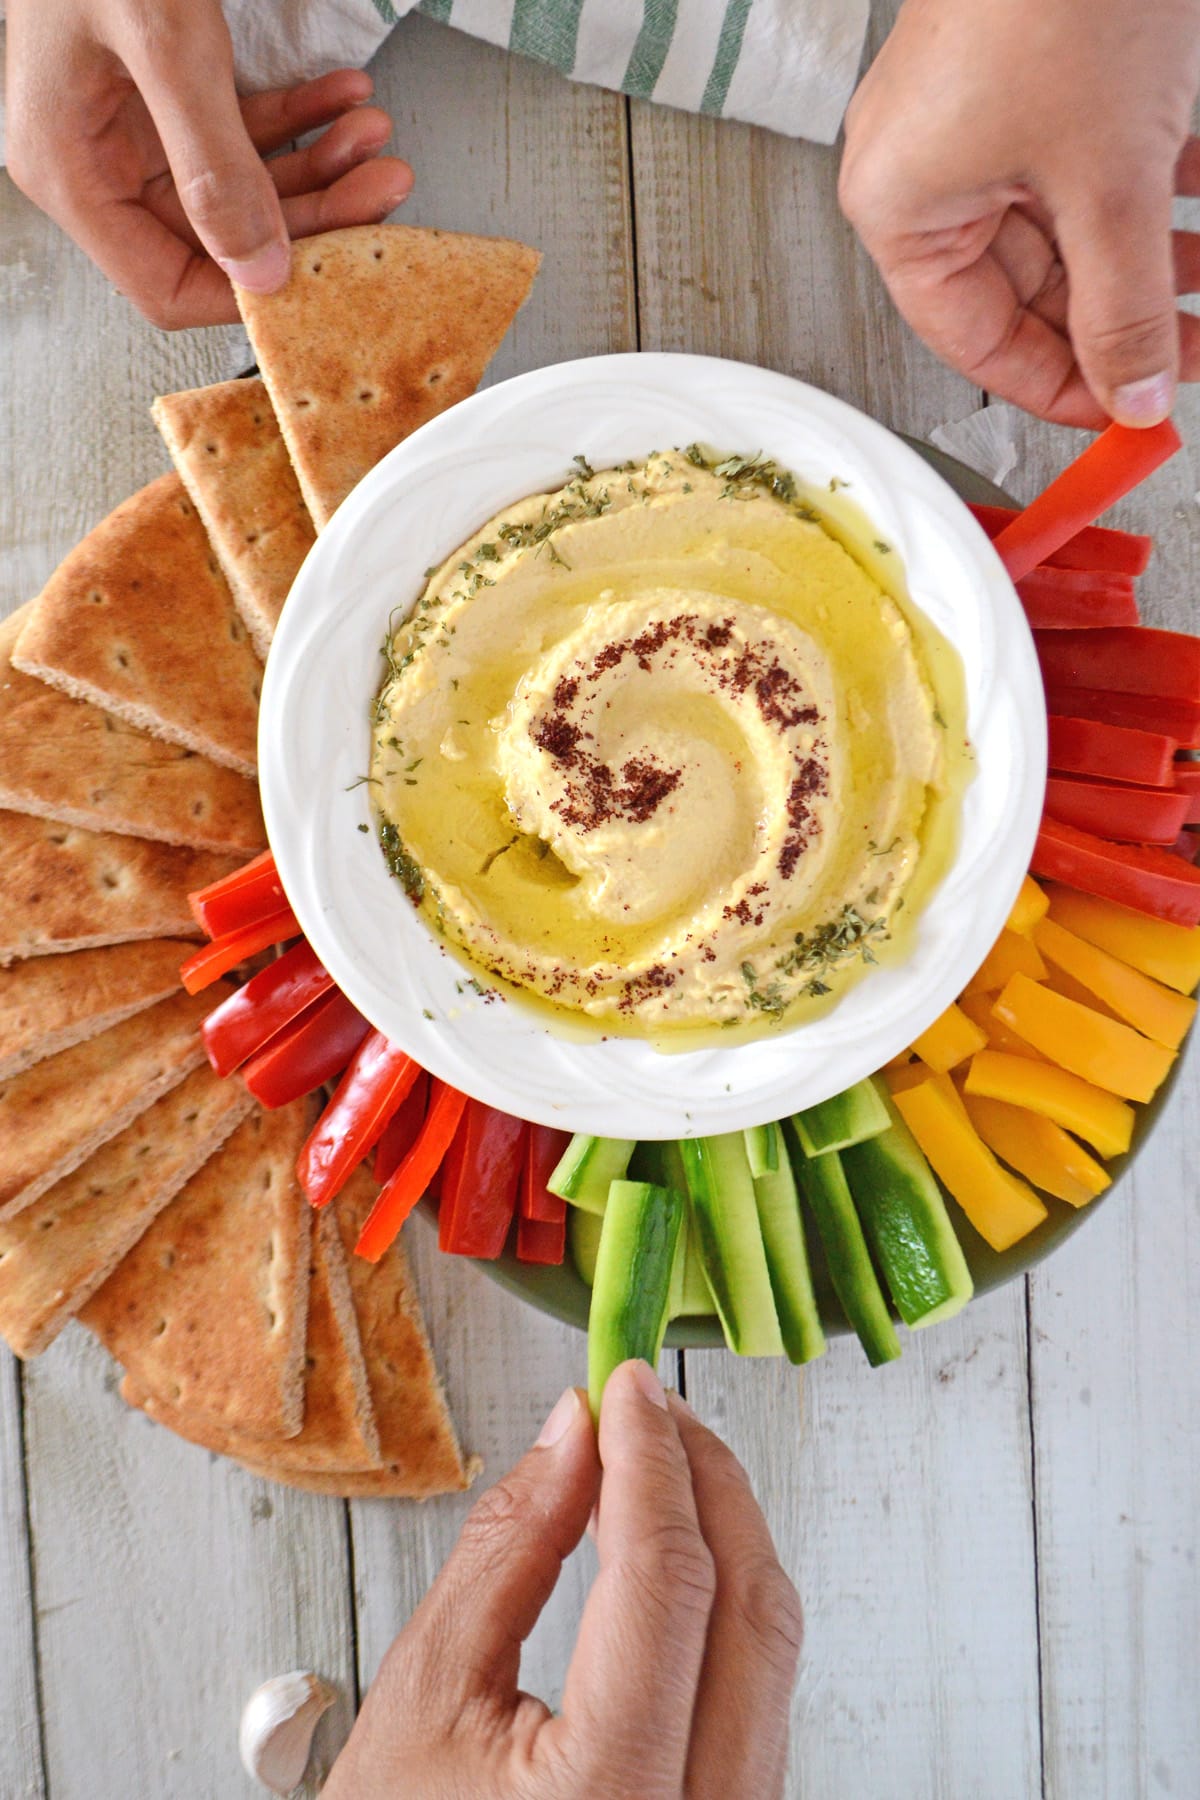 hands reaching out for veggie strips and pita wedges with a big bowl of hummus on the center.